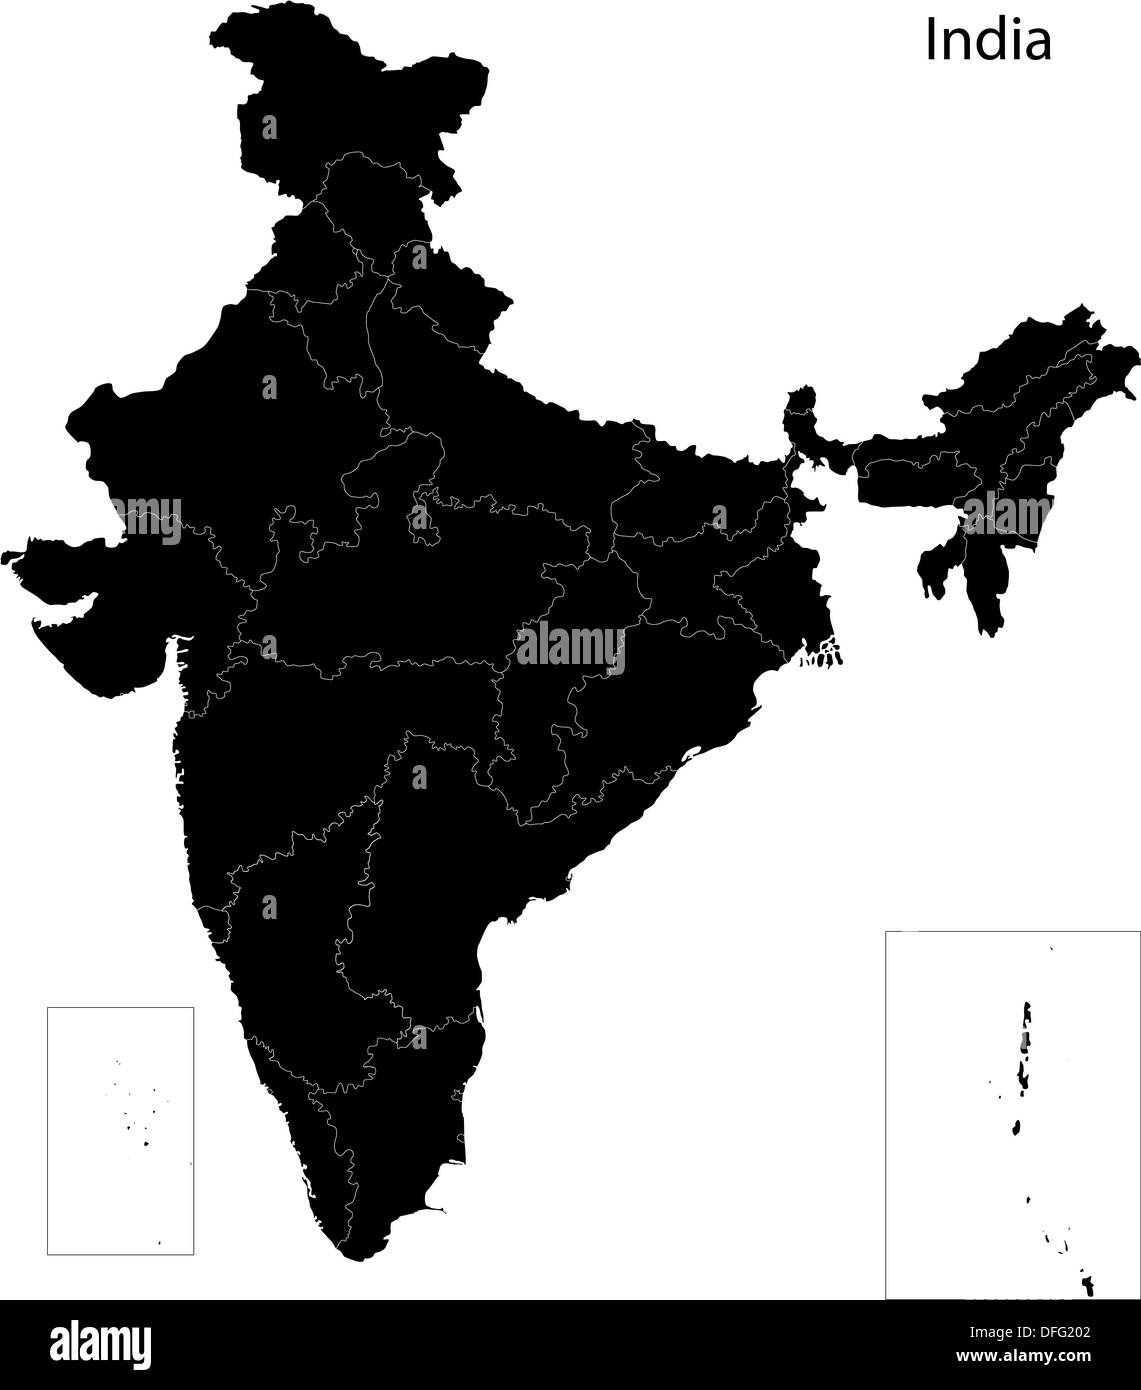 India map Black and White Stock Photos Images   Alamy